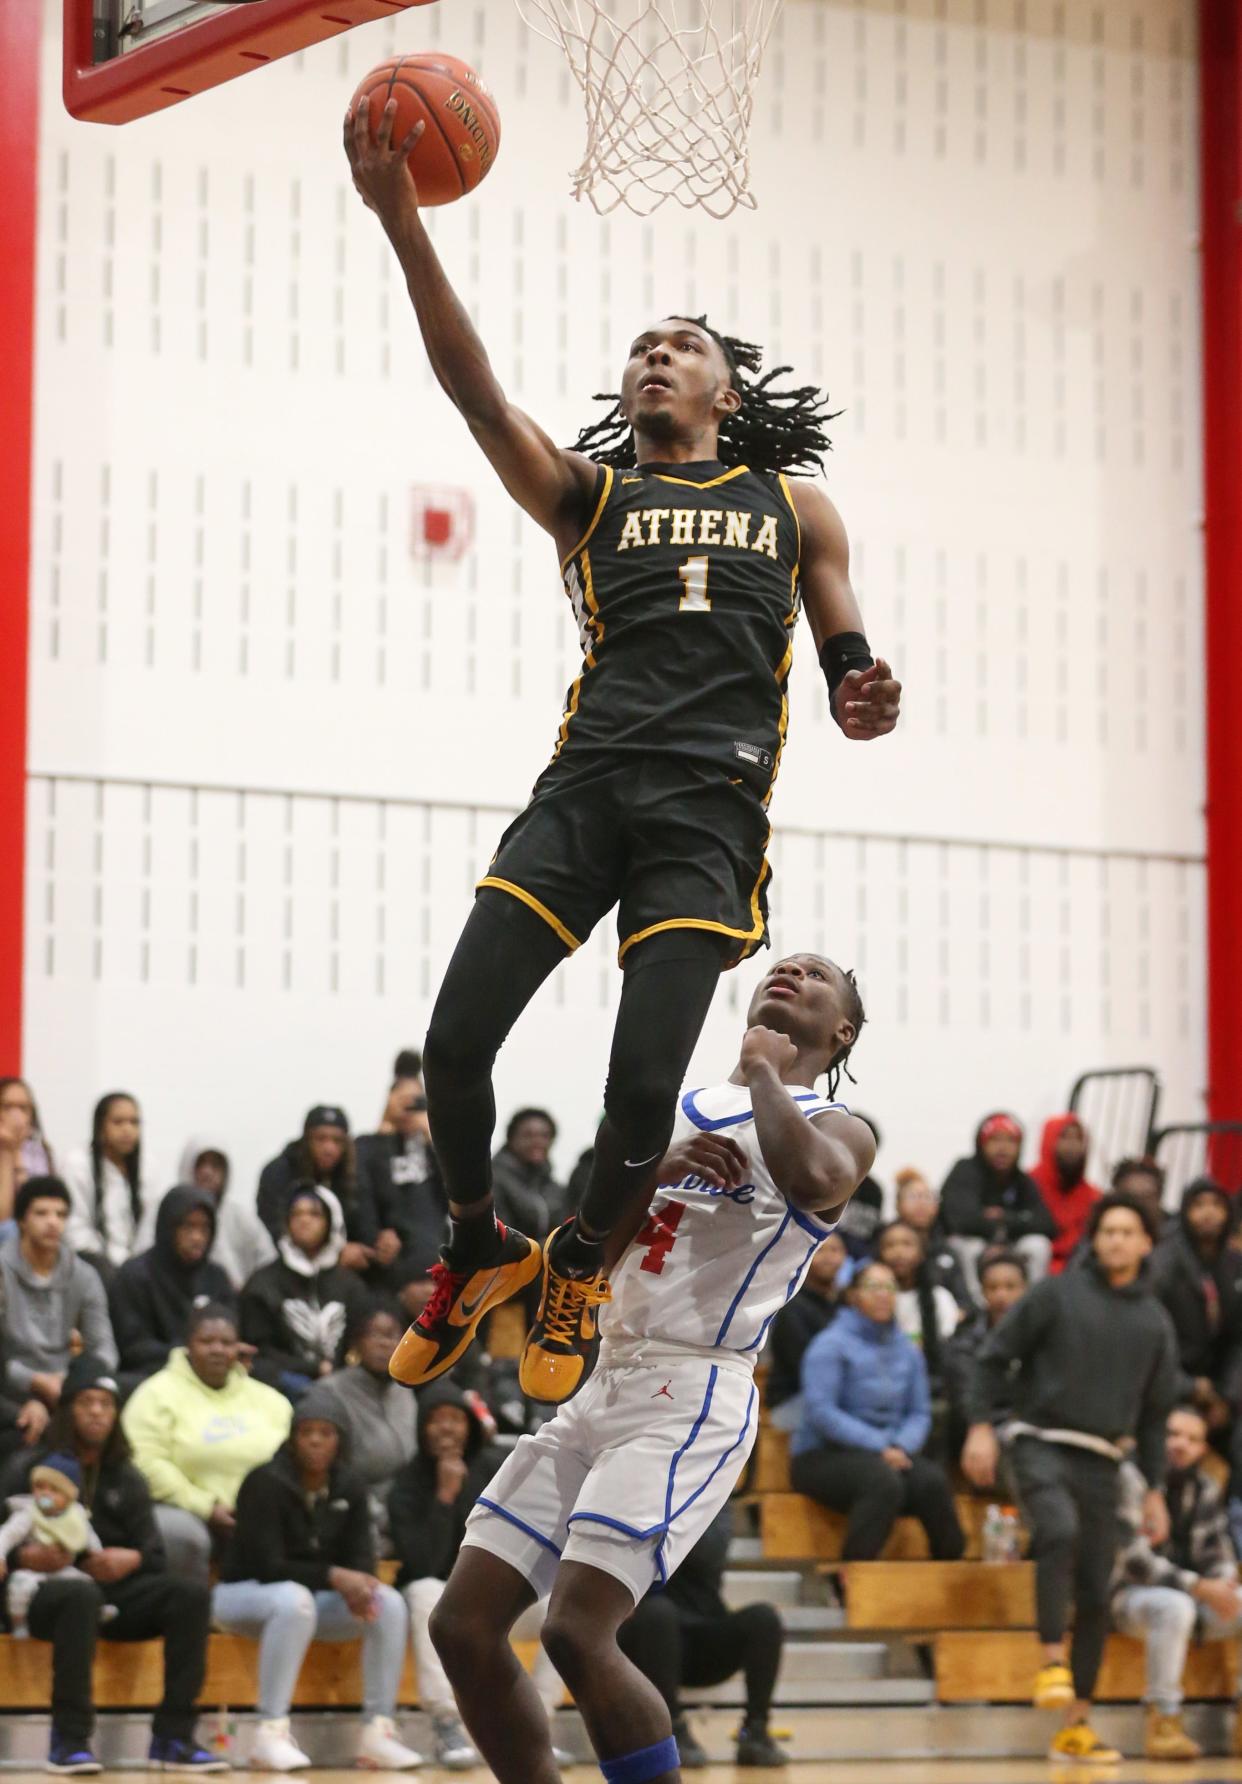 Athena's Khorie Reaves drives in for two points over Monroe's Tajmir Mullins during their Section V boys basketball game.